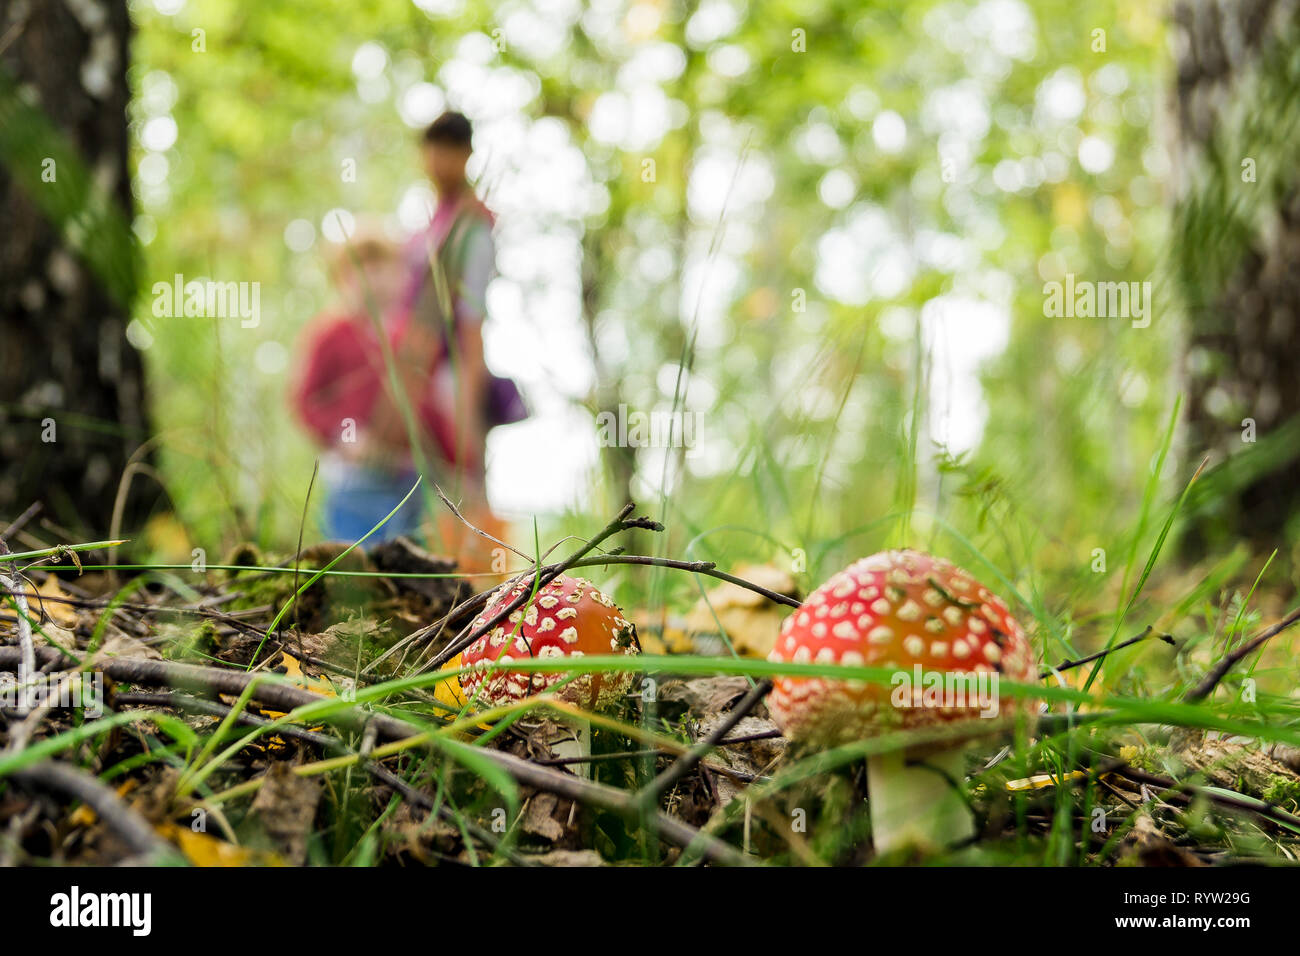 mushroom pickers in the forest, end of summer, amanitas are growing Stock Photo